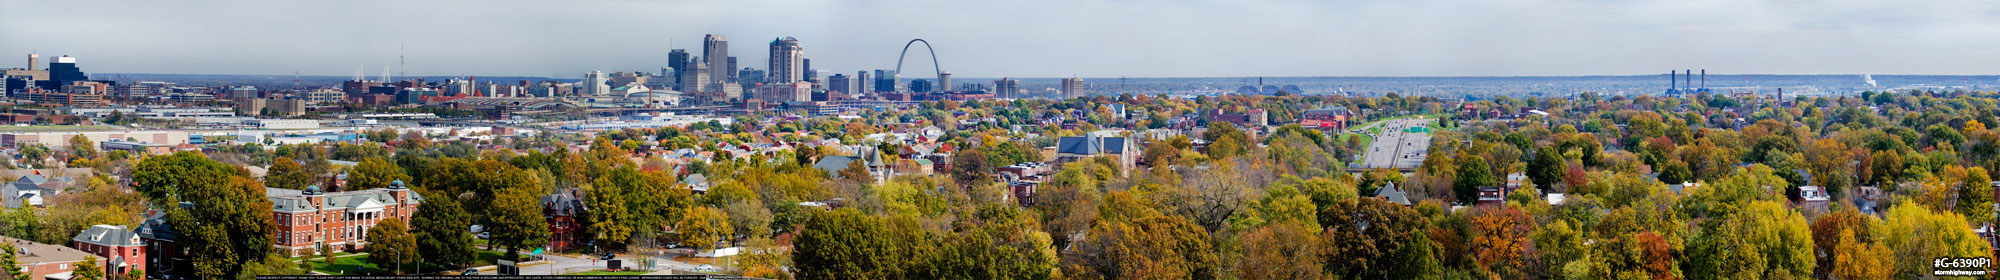 St. Louis skyline with fall colors panorama